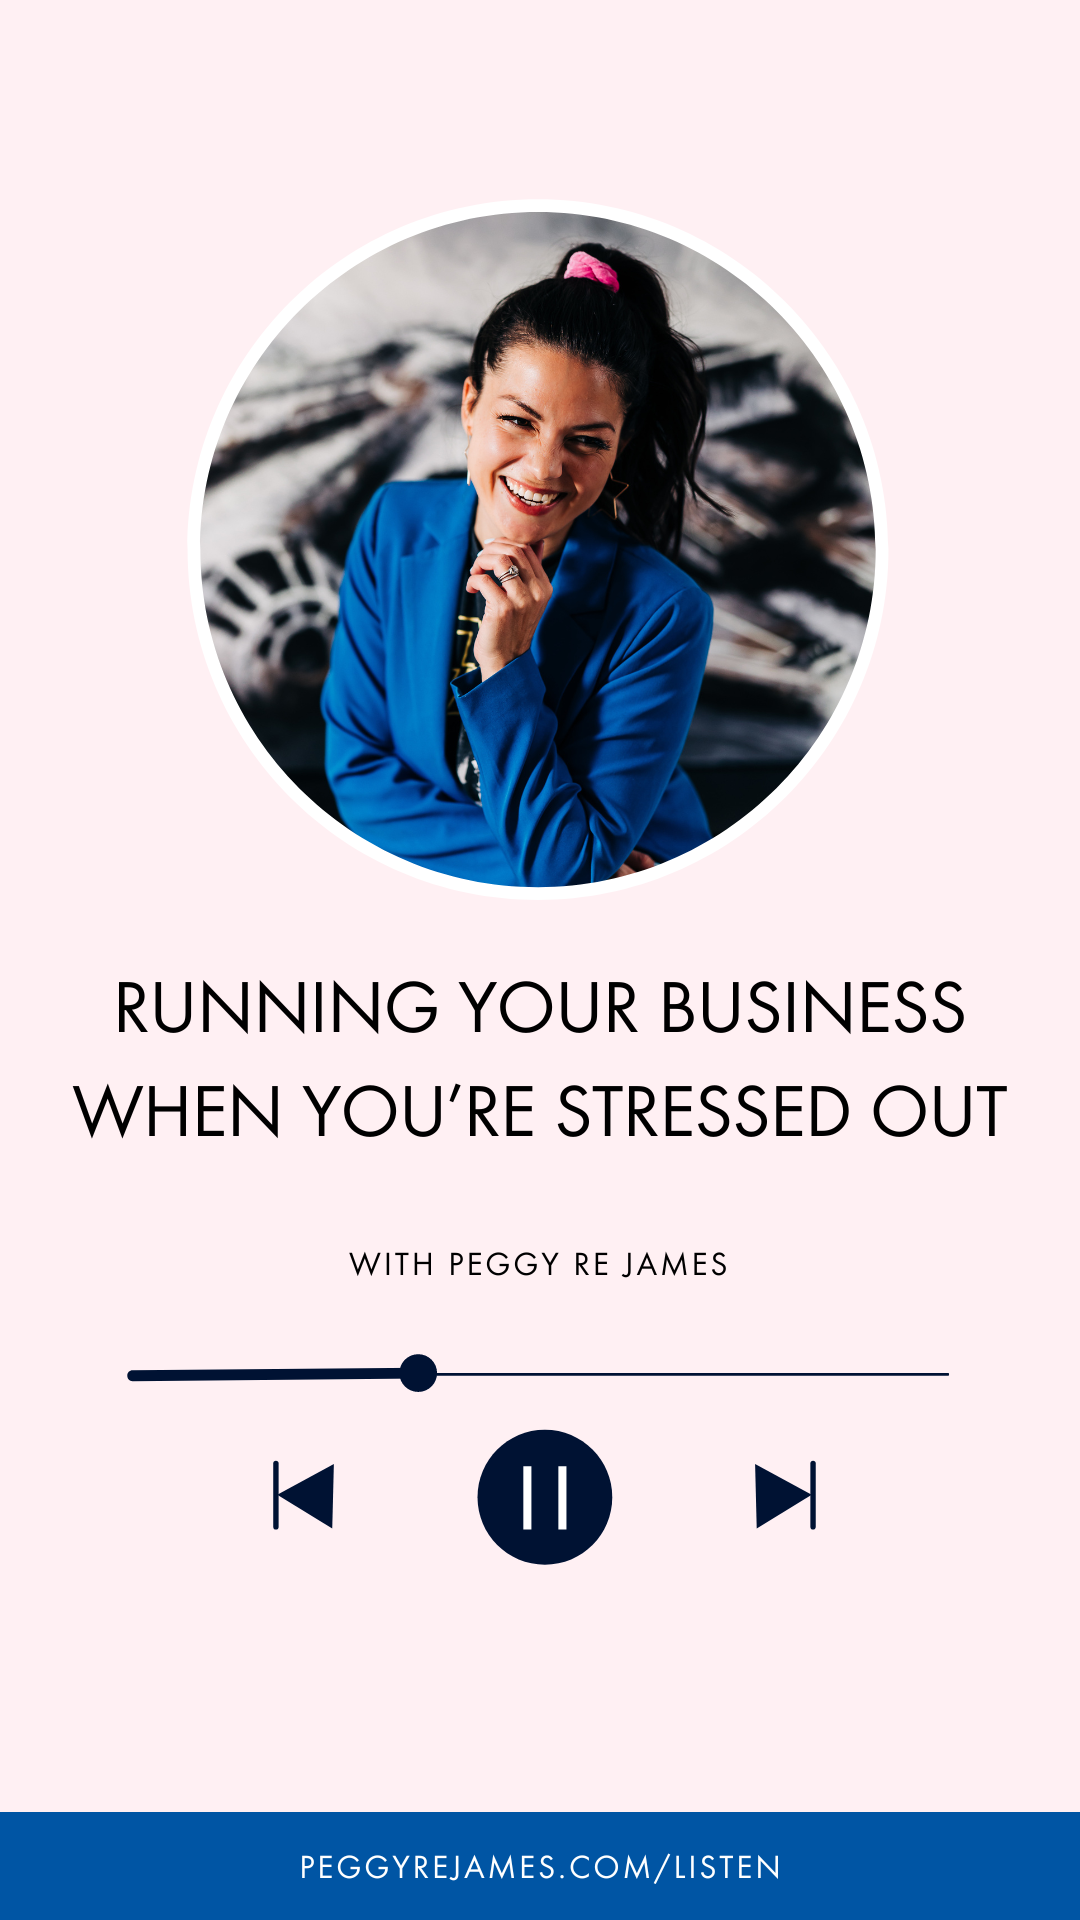 Running your business when you’re stressed out